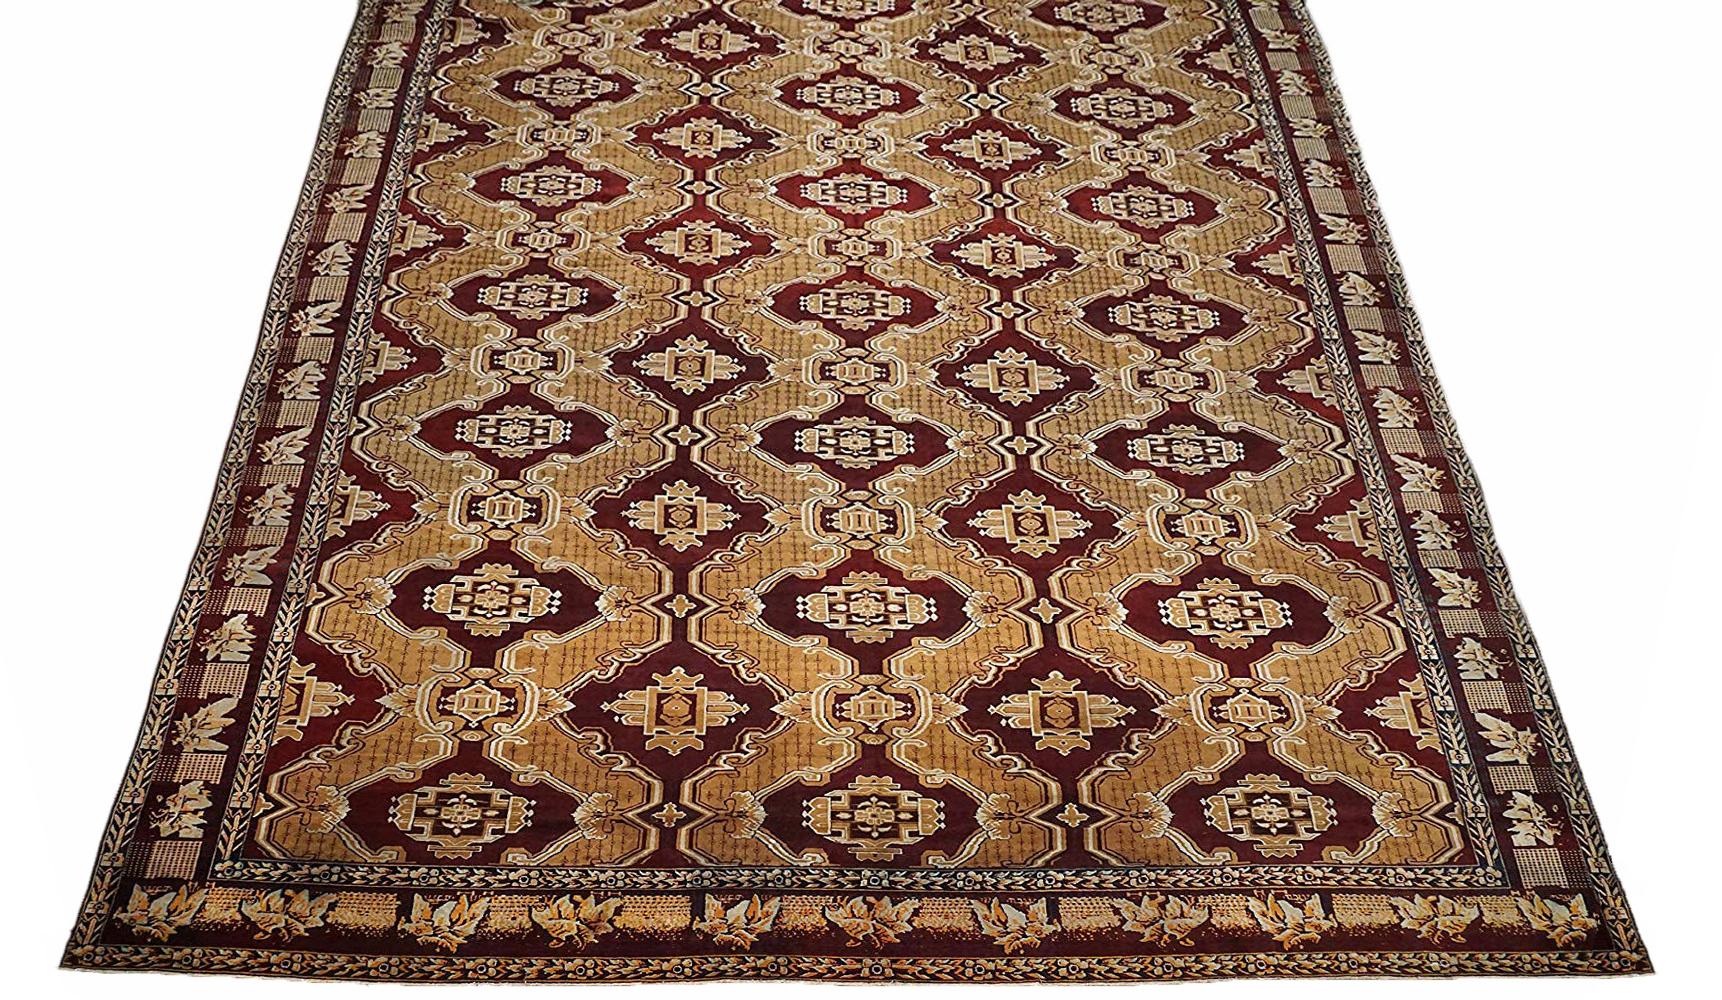 Hand-knotted wool pile on a cotton foundation.

Circa 1880

Dimensions: 16'7